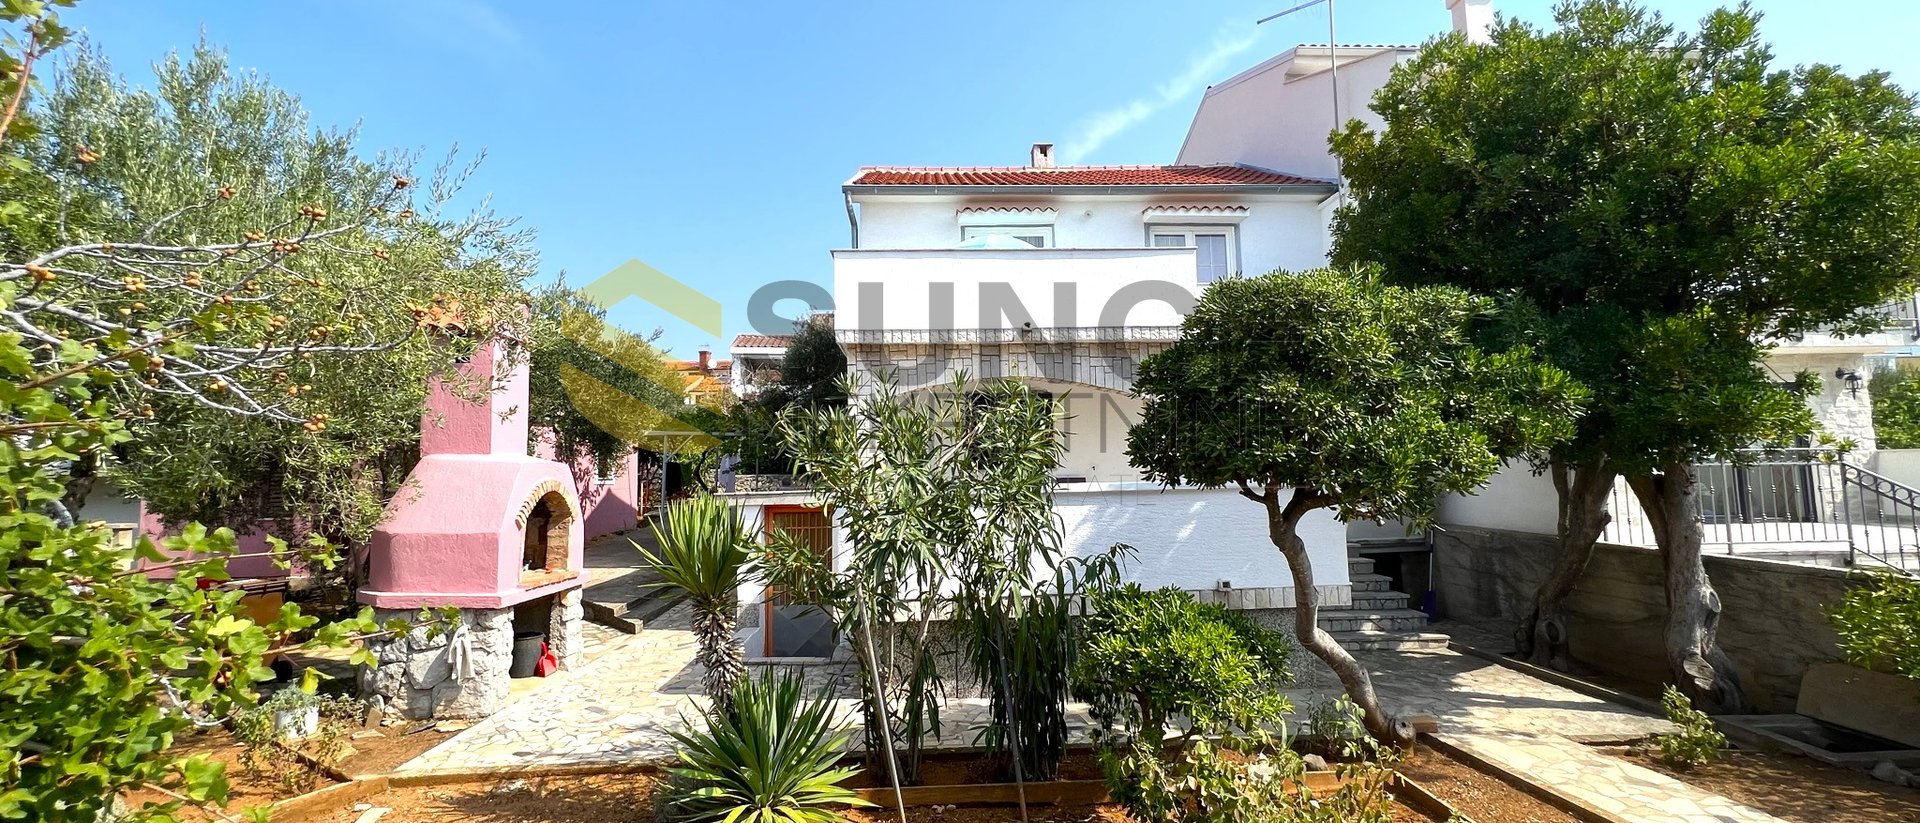 Town of Krk, semi-detached house in an excellent position 300m from the beach!